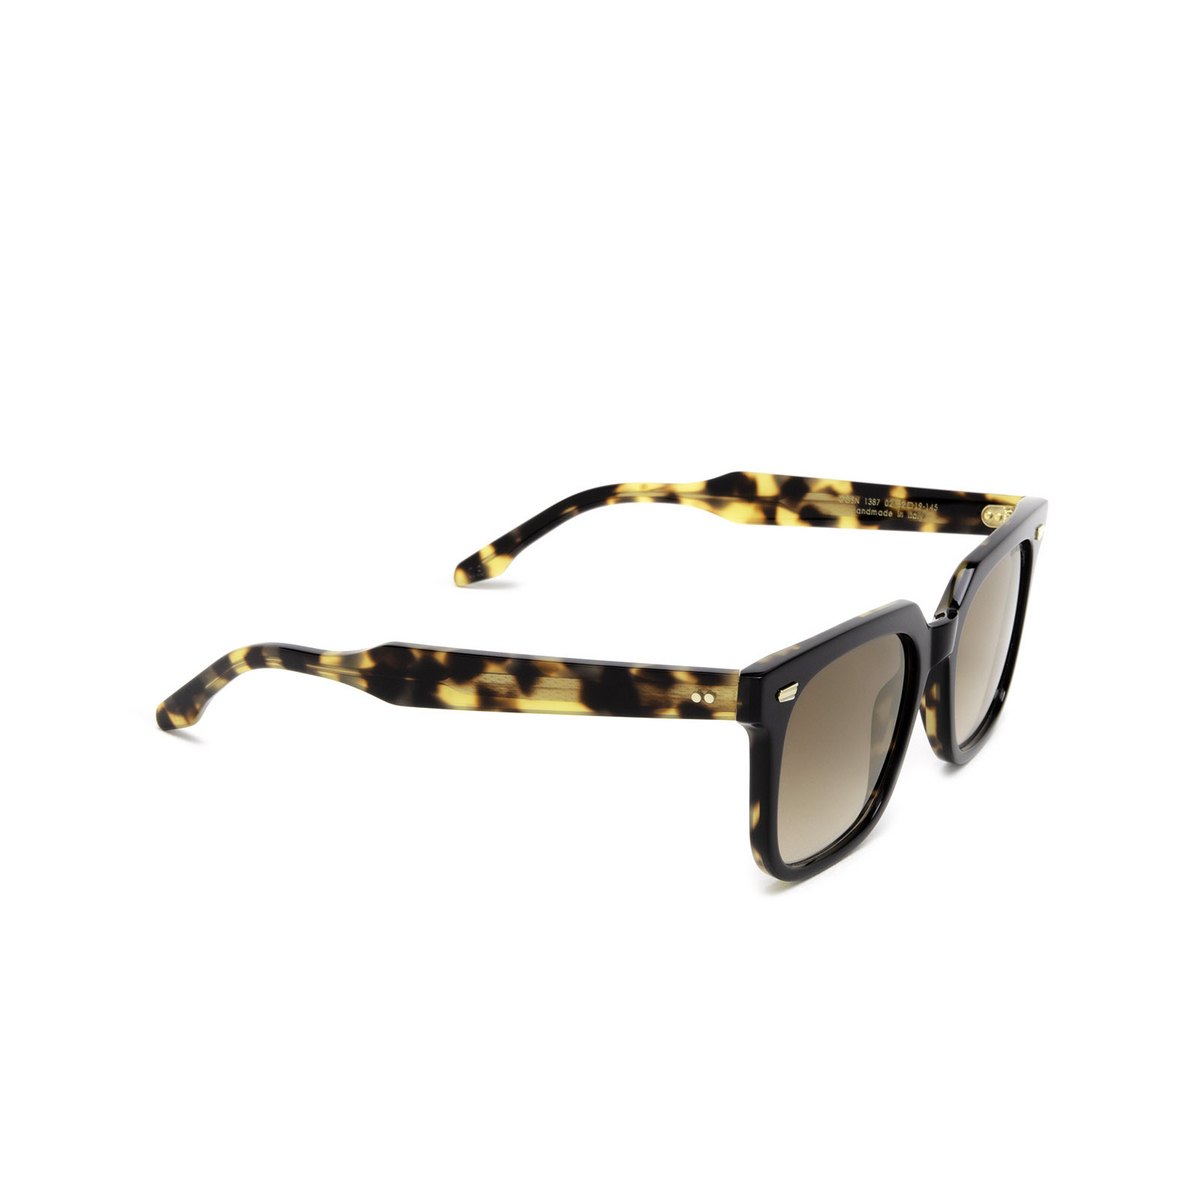 Cutler and Gross 1387 Sunglasses 02 Black on Camo - three-quarters view